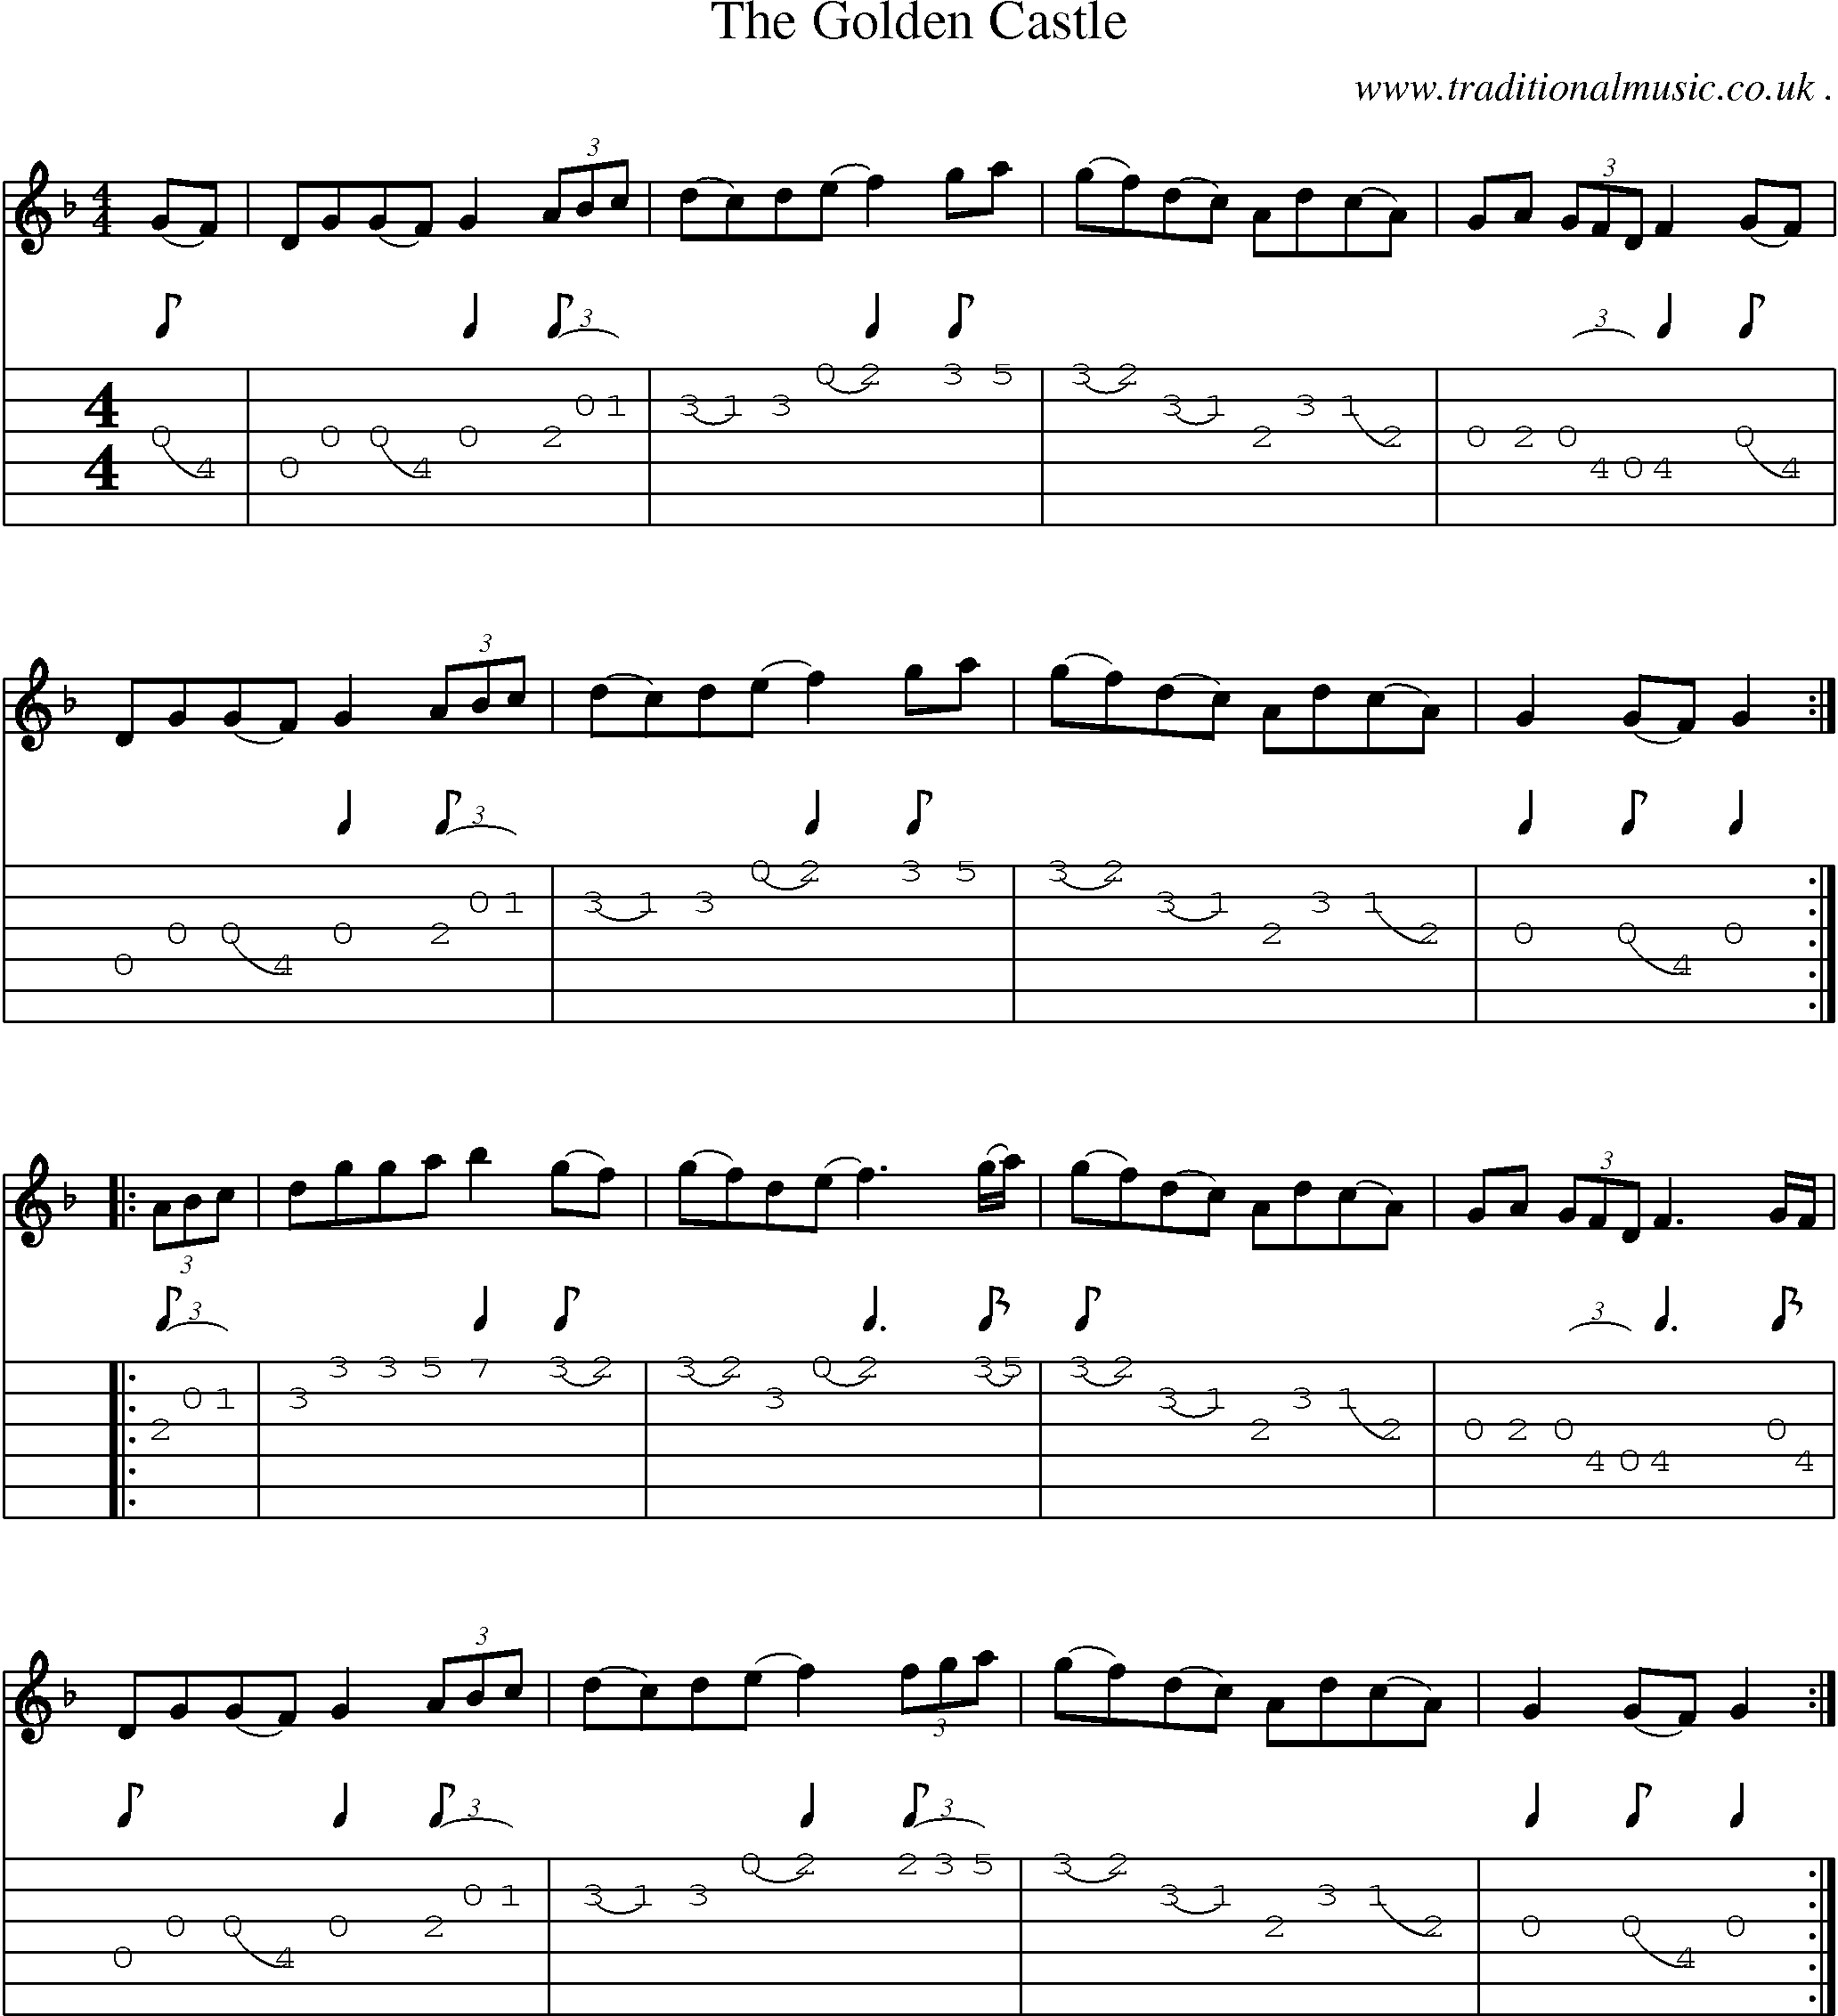 Sheet-Music and Guitar Tabs for The Golden Castle